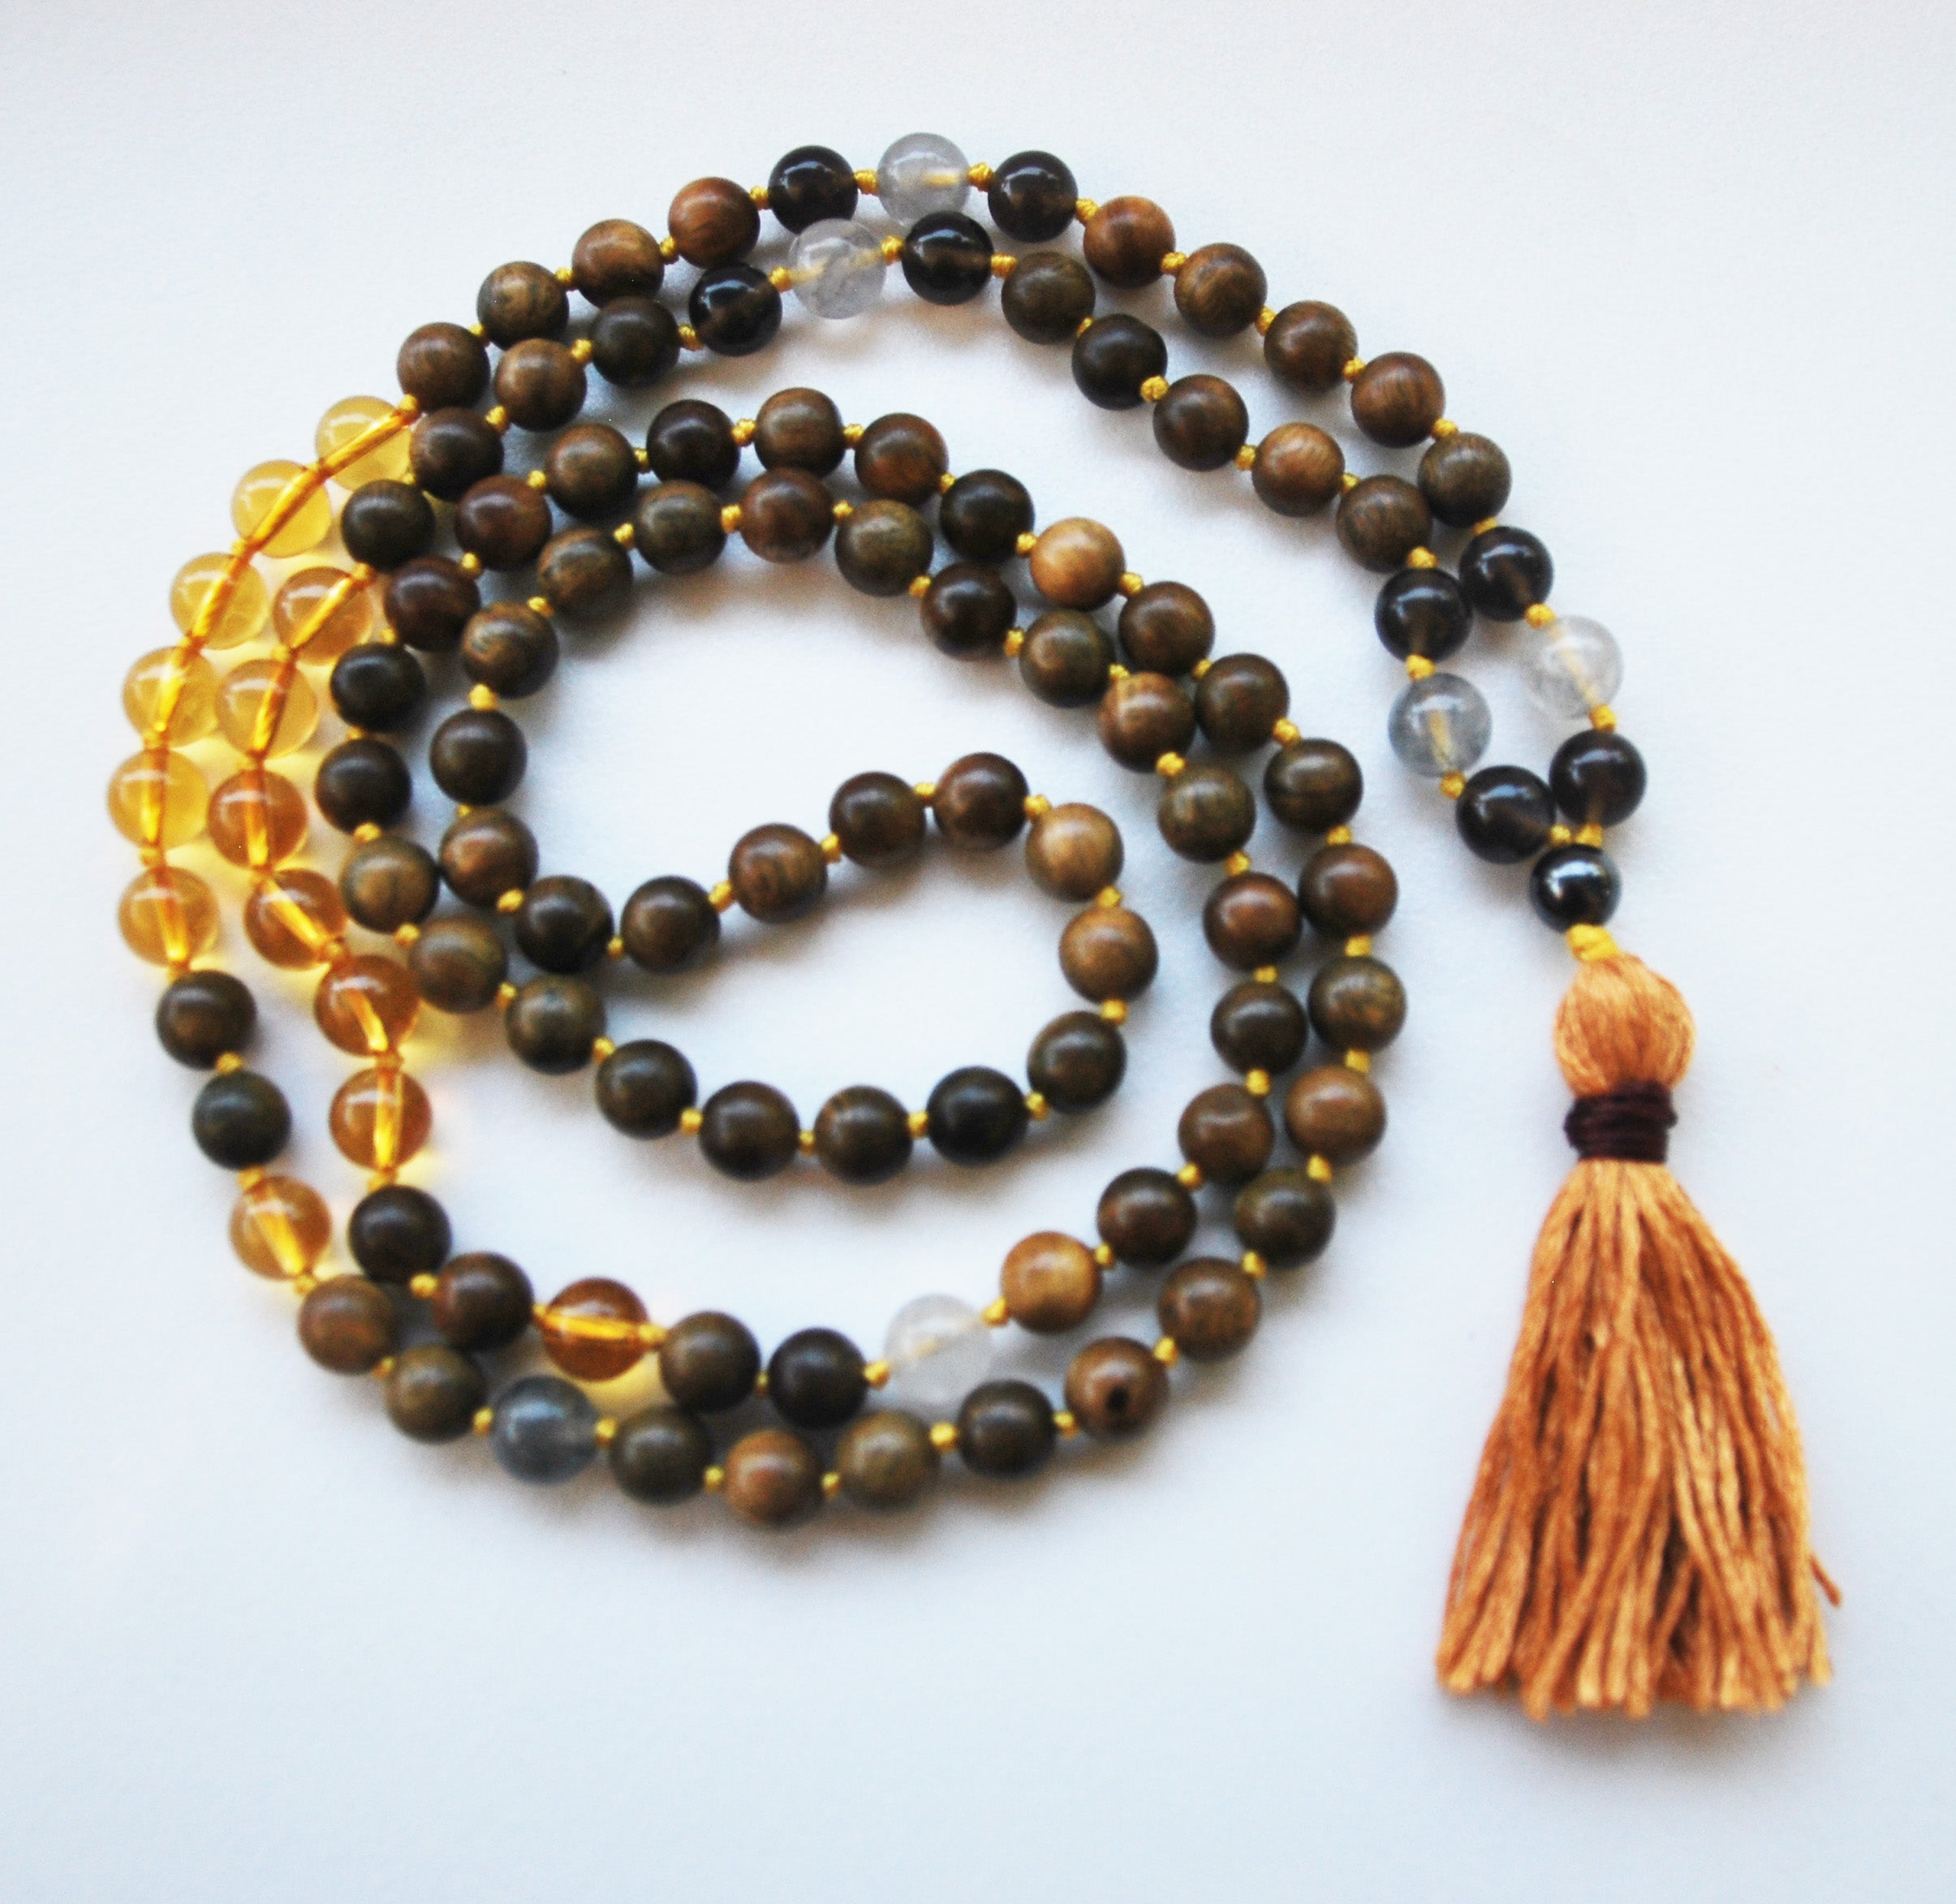 8mm Green Sandalwood & Citrine 108 Knotted Mala Necklace with Cotton Tassel